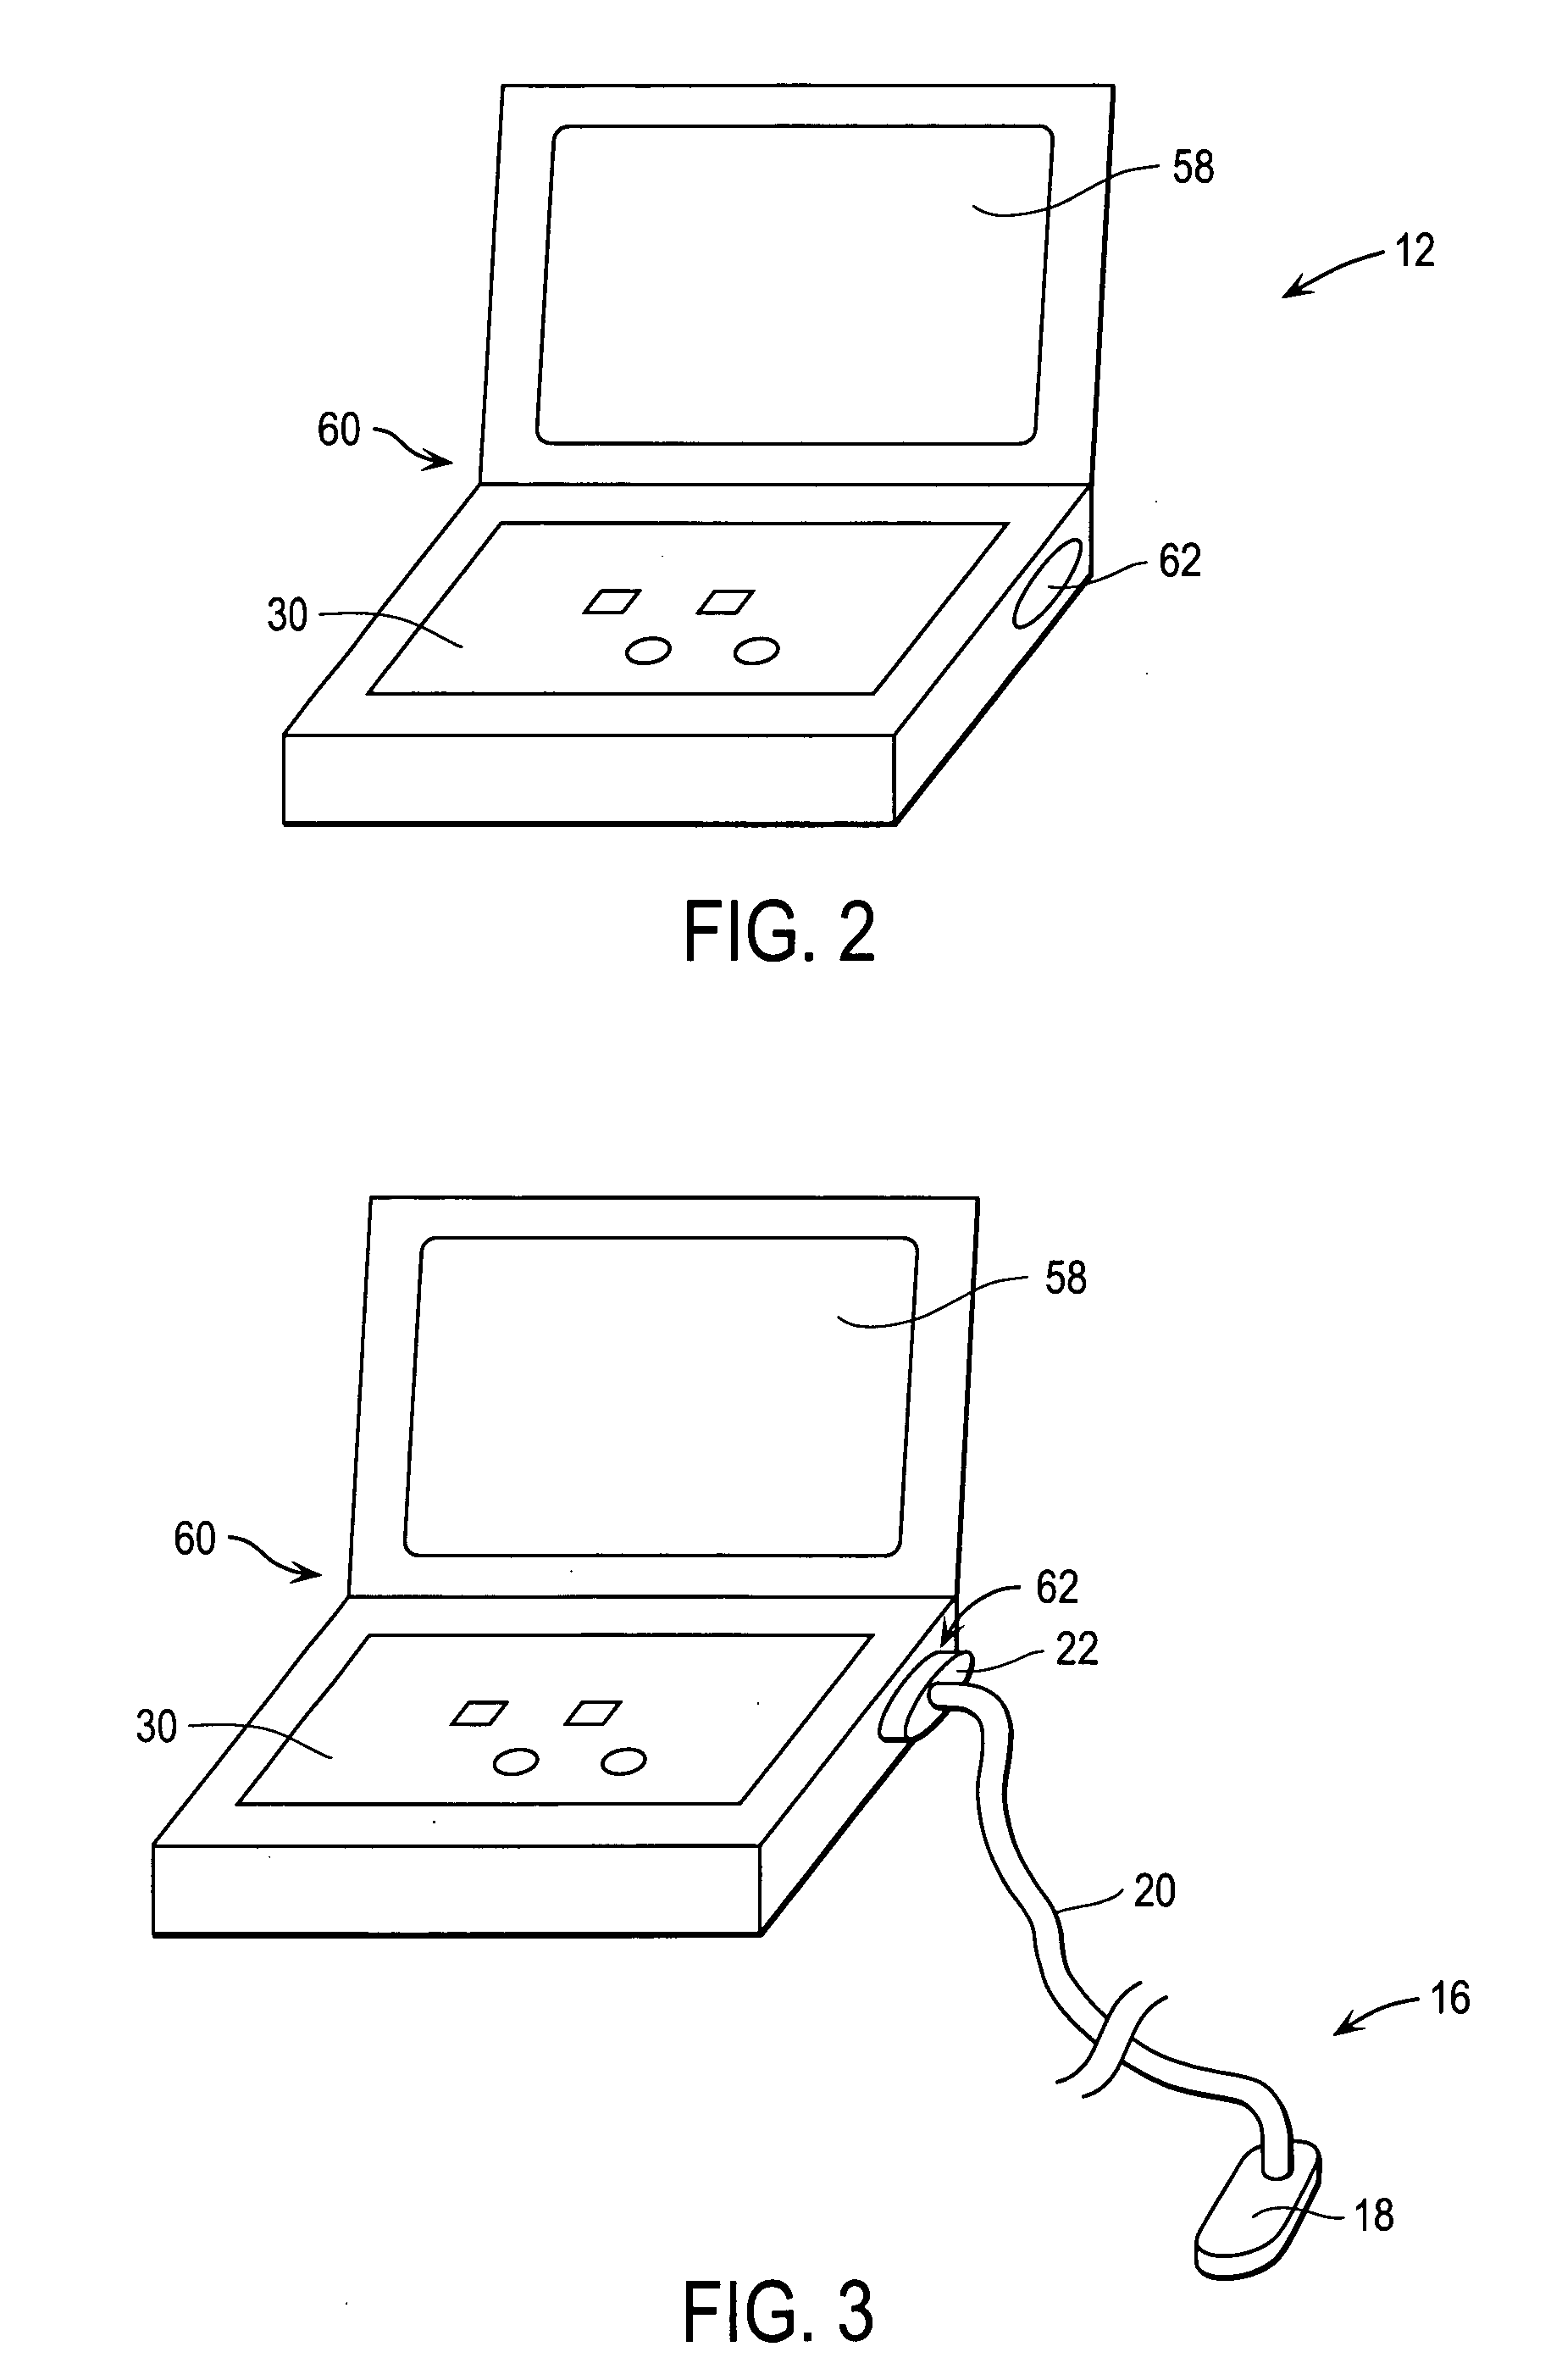 Control of user interfaces and displays for portable ultrasound unit and docking station